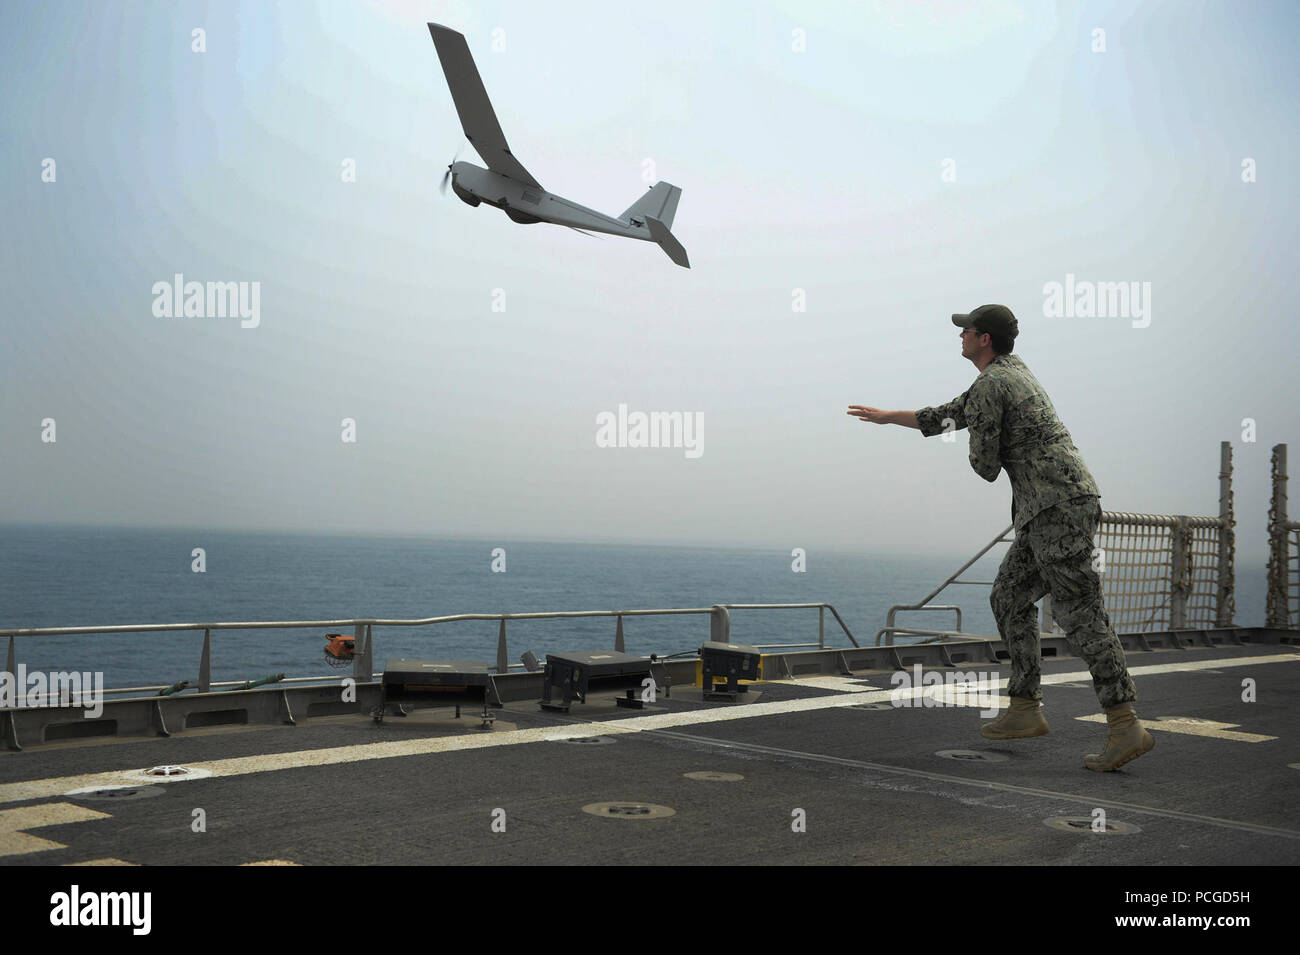 Information Technology Specialist 2nd Class Joshua Lesperance launches a Puma unmanned aerial vehicle during maritime law enforcement operations aboard the USNS Spearhead (JHSV 1), Jan. 29, 2015. Spearhead is on a scheduled deployment to the U.S. 6th Fleet area of operations in support of the international collaborative capacity-building program Africa Partnership Station. Stock Photo